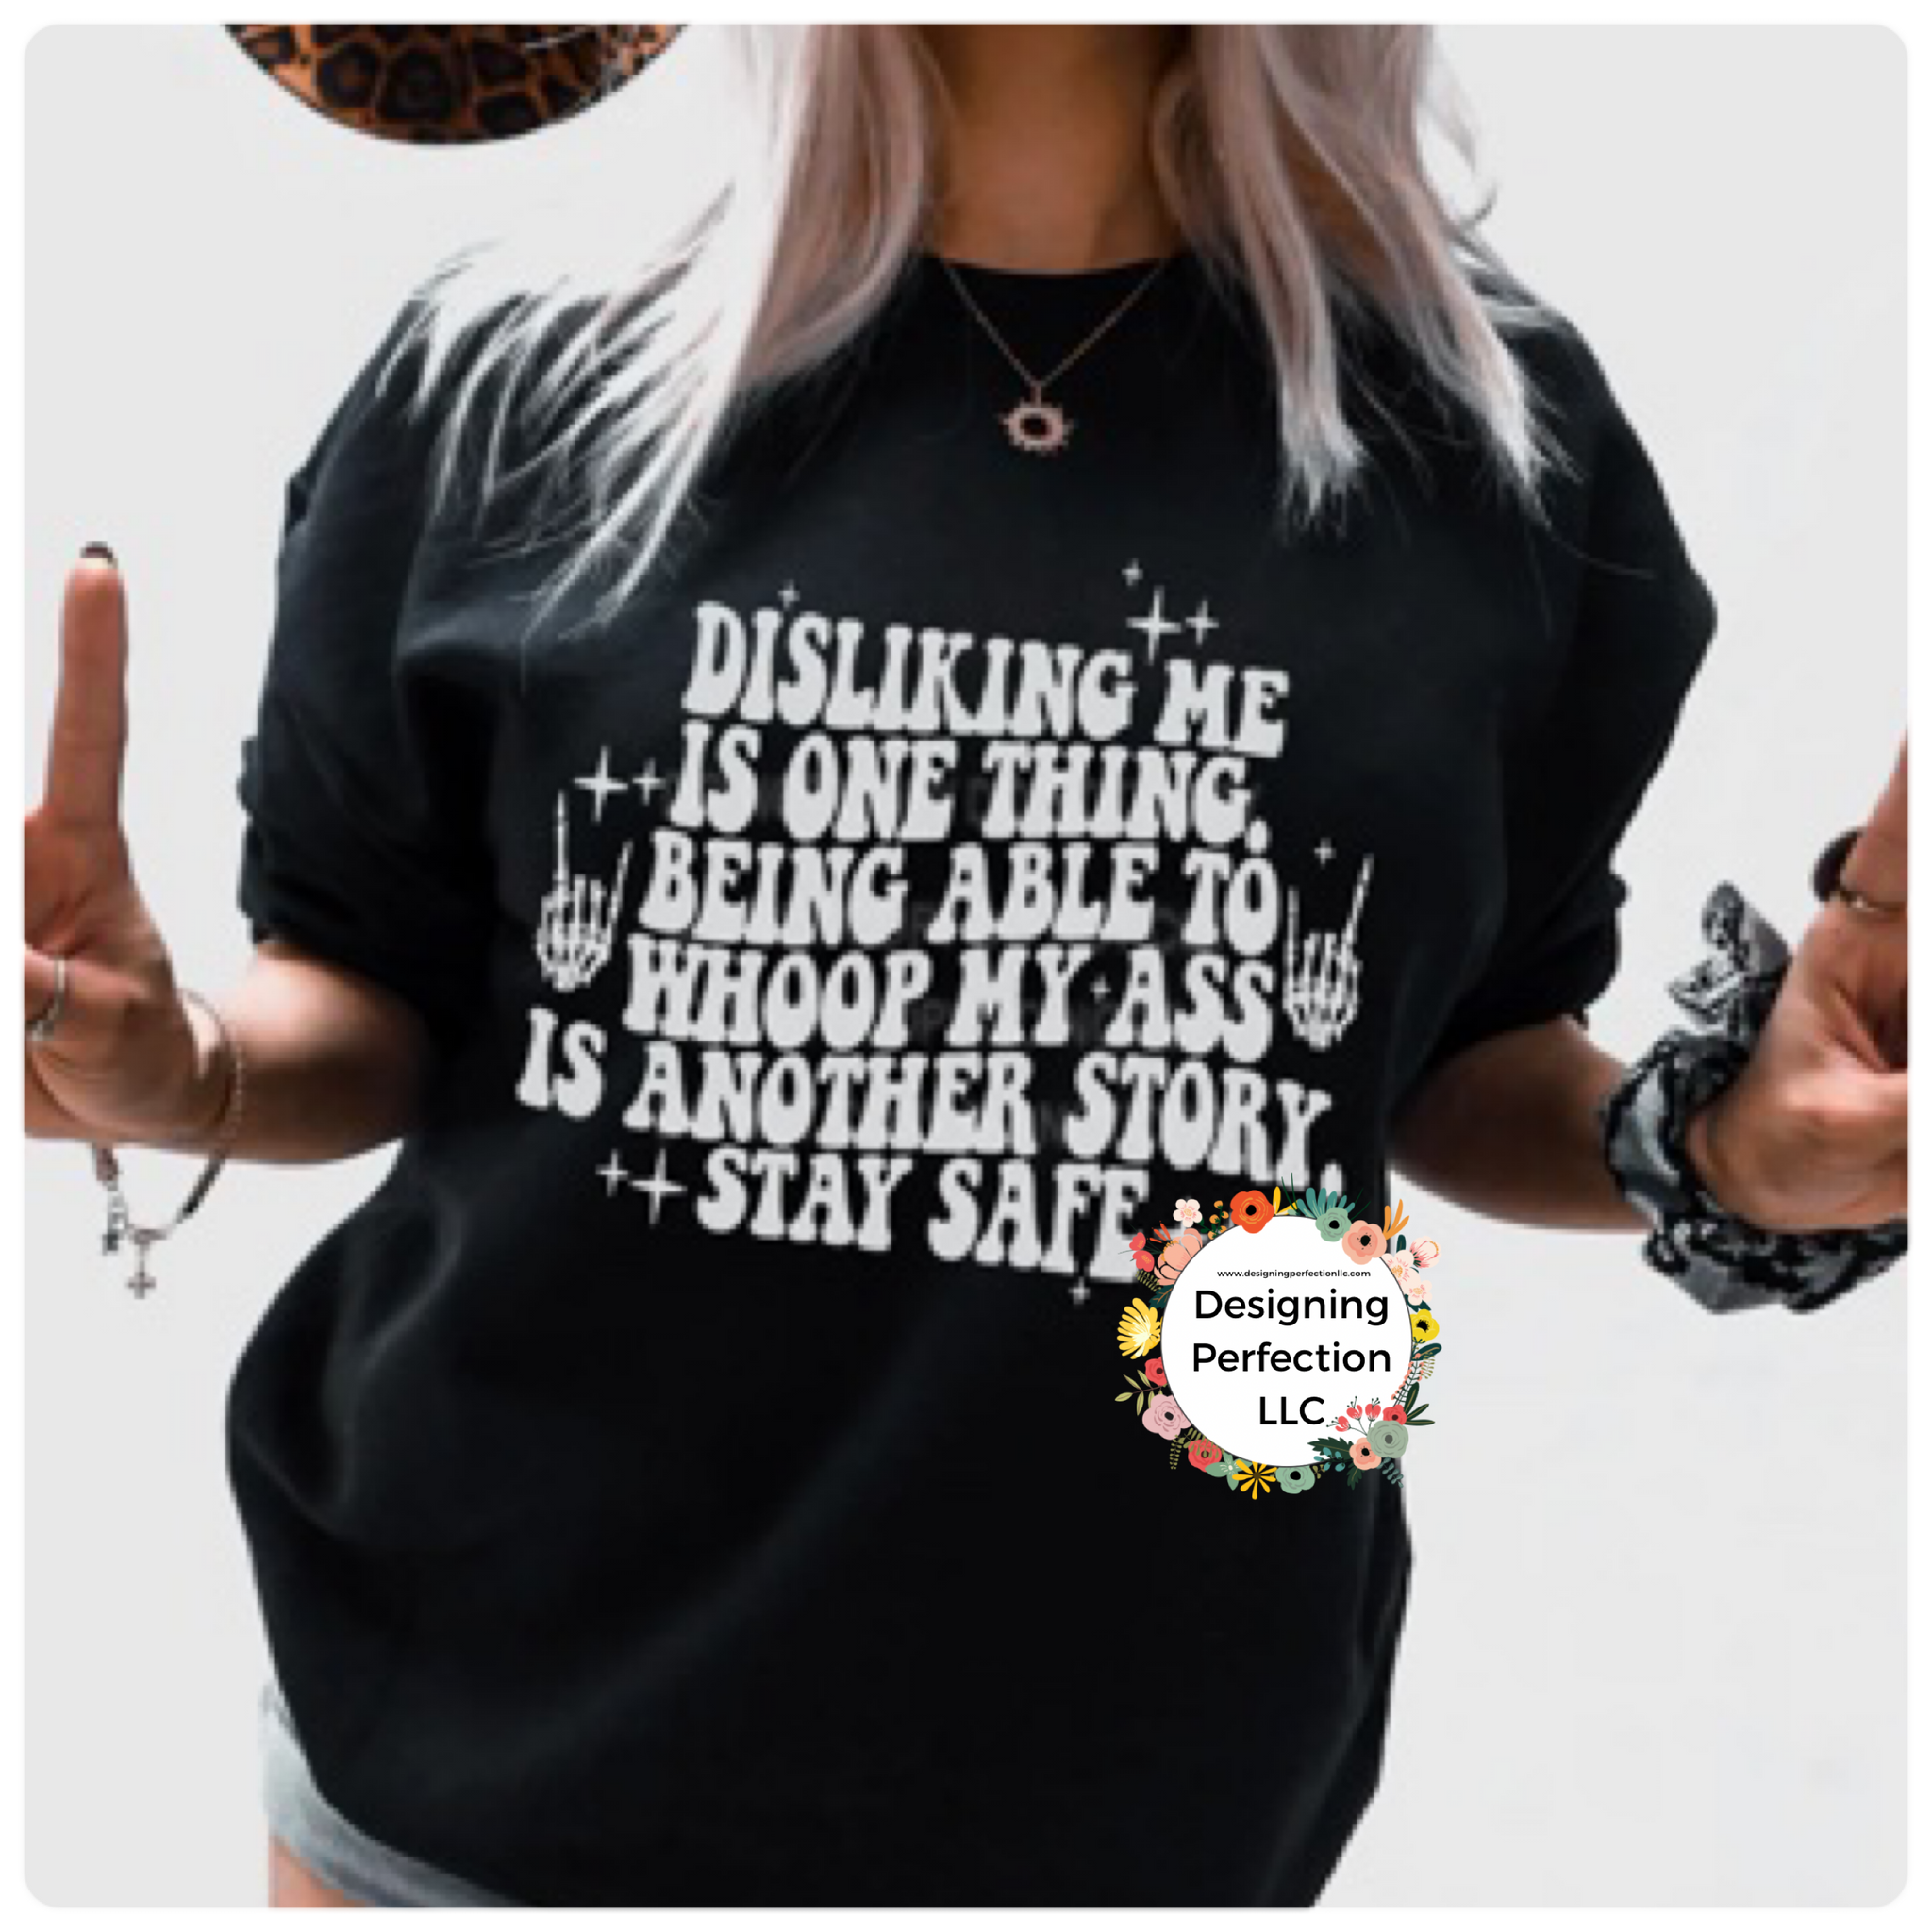 Disliking me is one thing being able to whoop my ass is another story (16) on tee